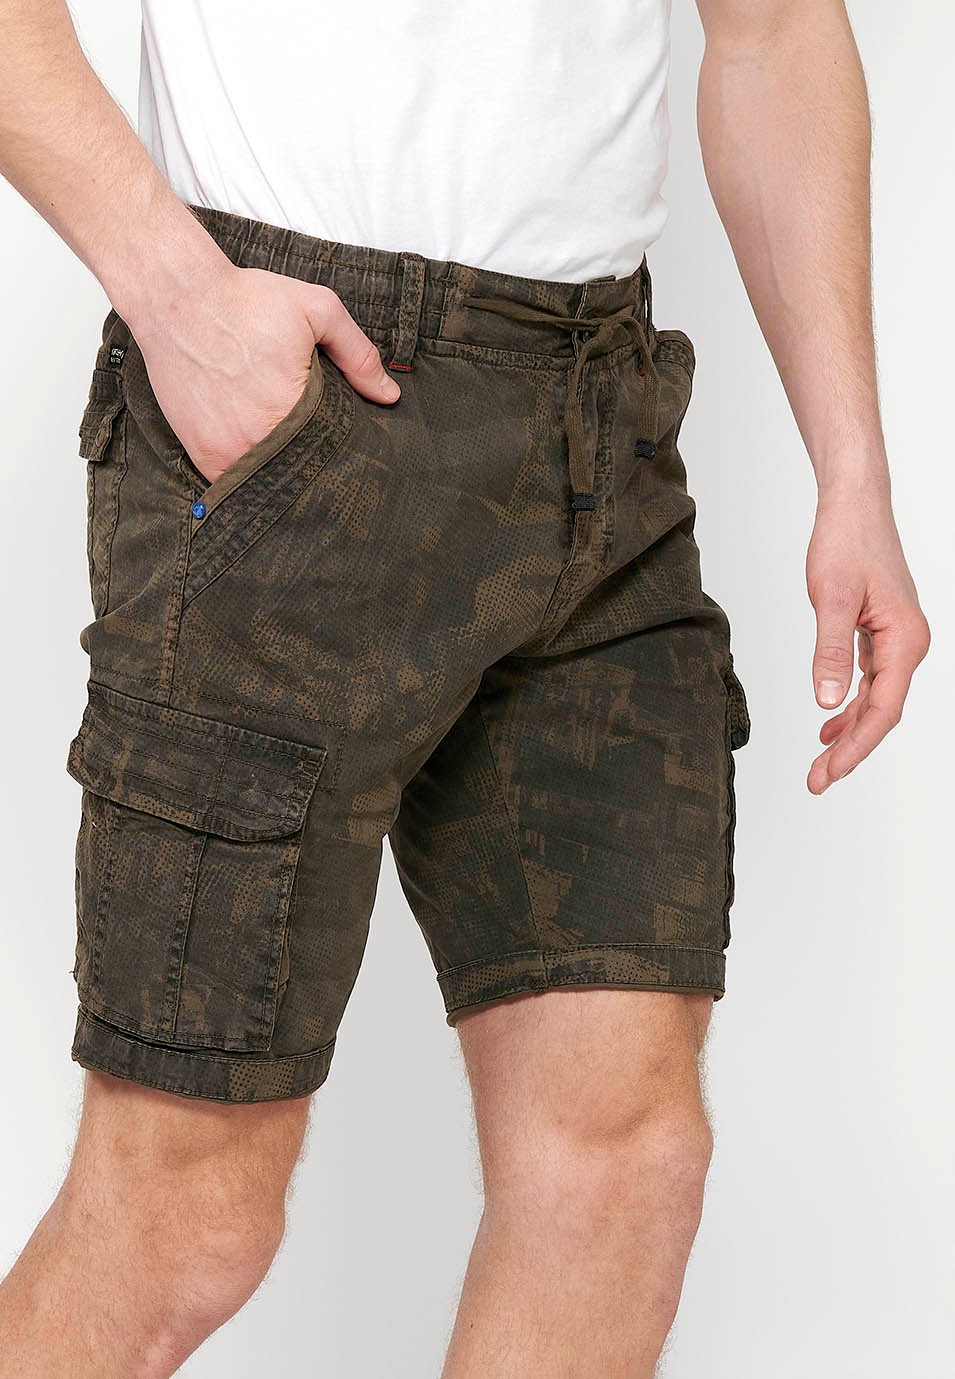 Cargo shorts with front closure with zipper and button and four pockets, two rear pockets with flap with two cargo pockets with flap and adjustable waist with drawstring in Khaki color for men 2